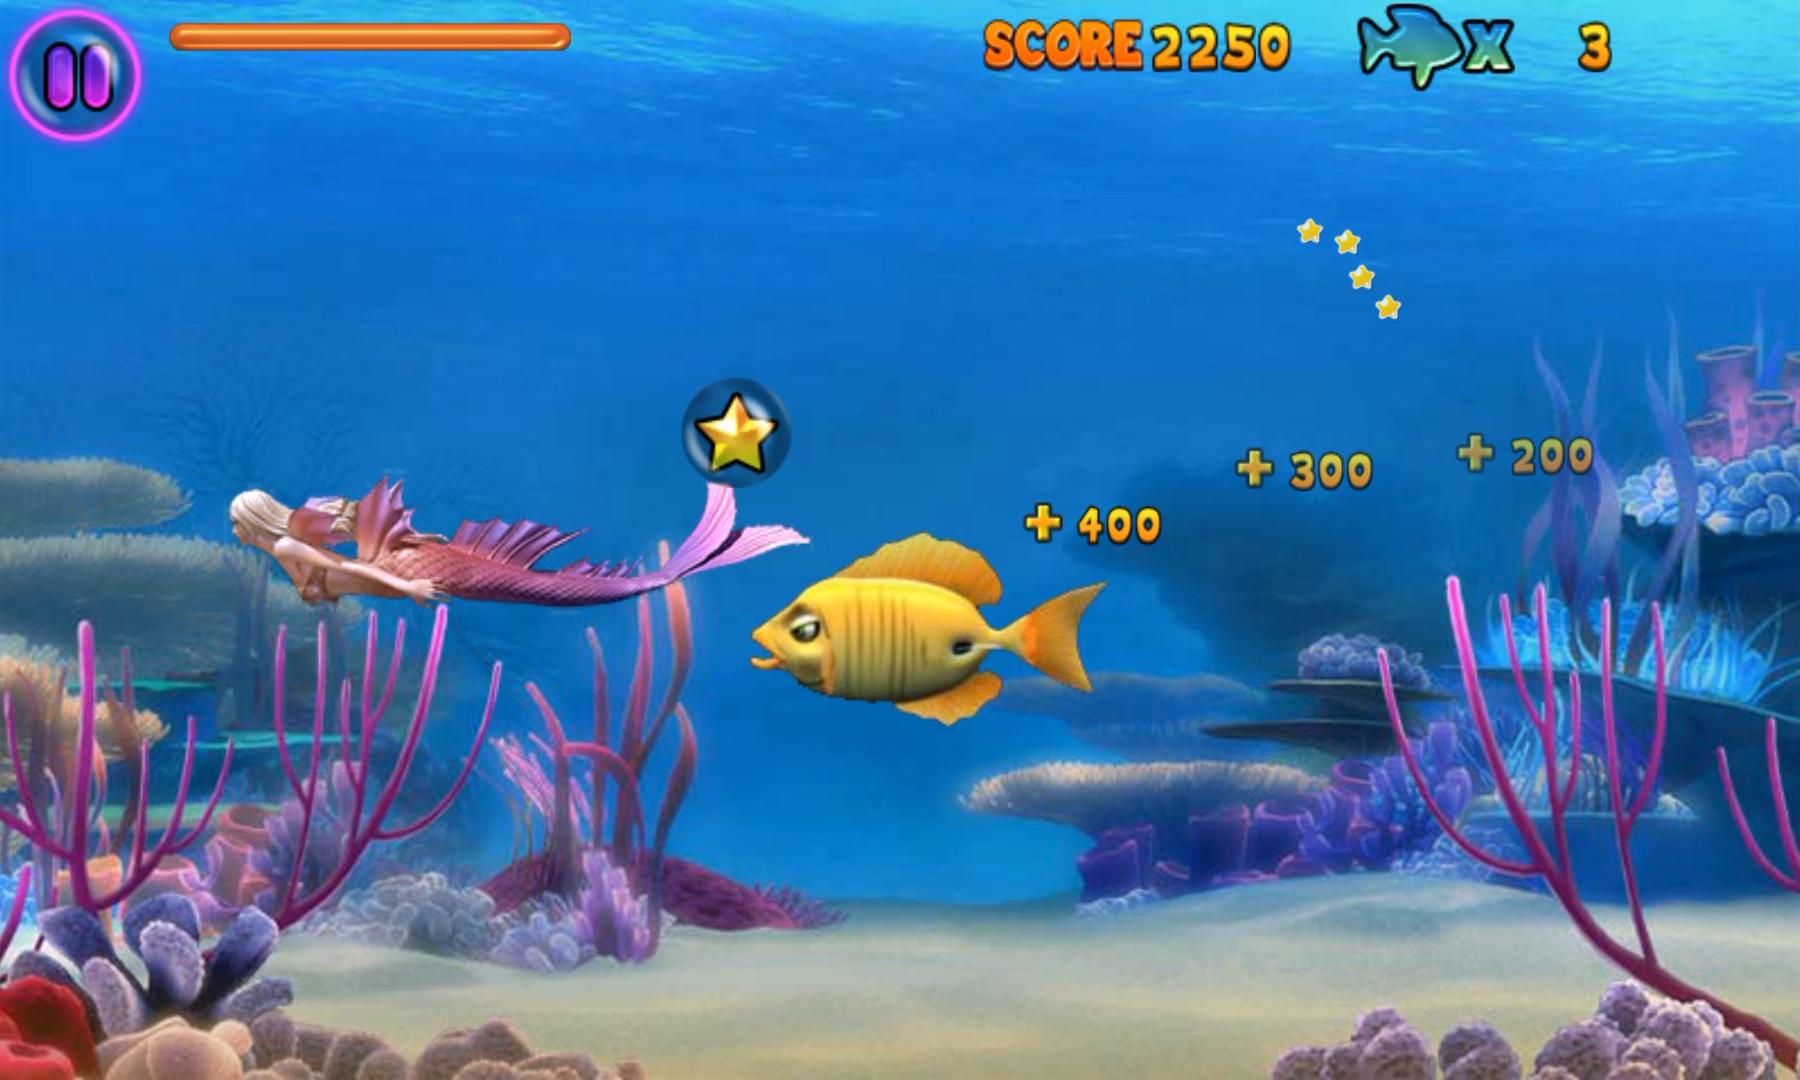 Fish Feeding for Android - APK Download